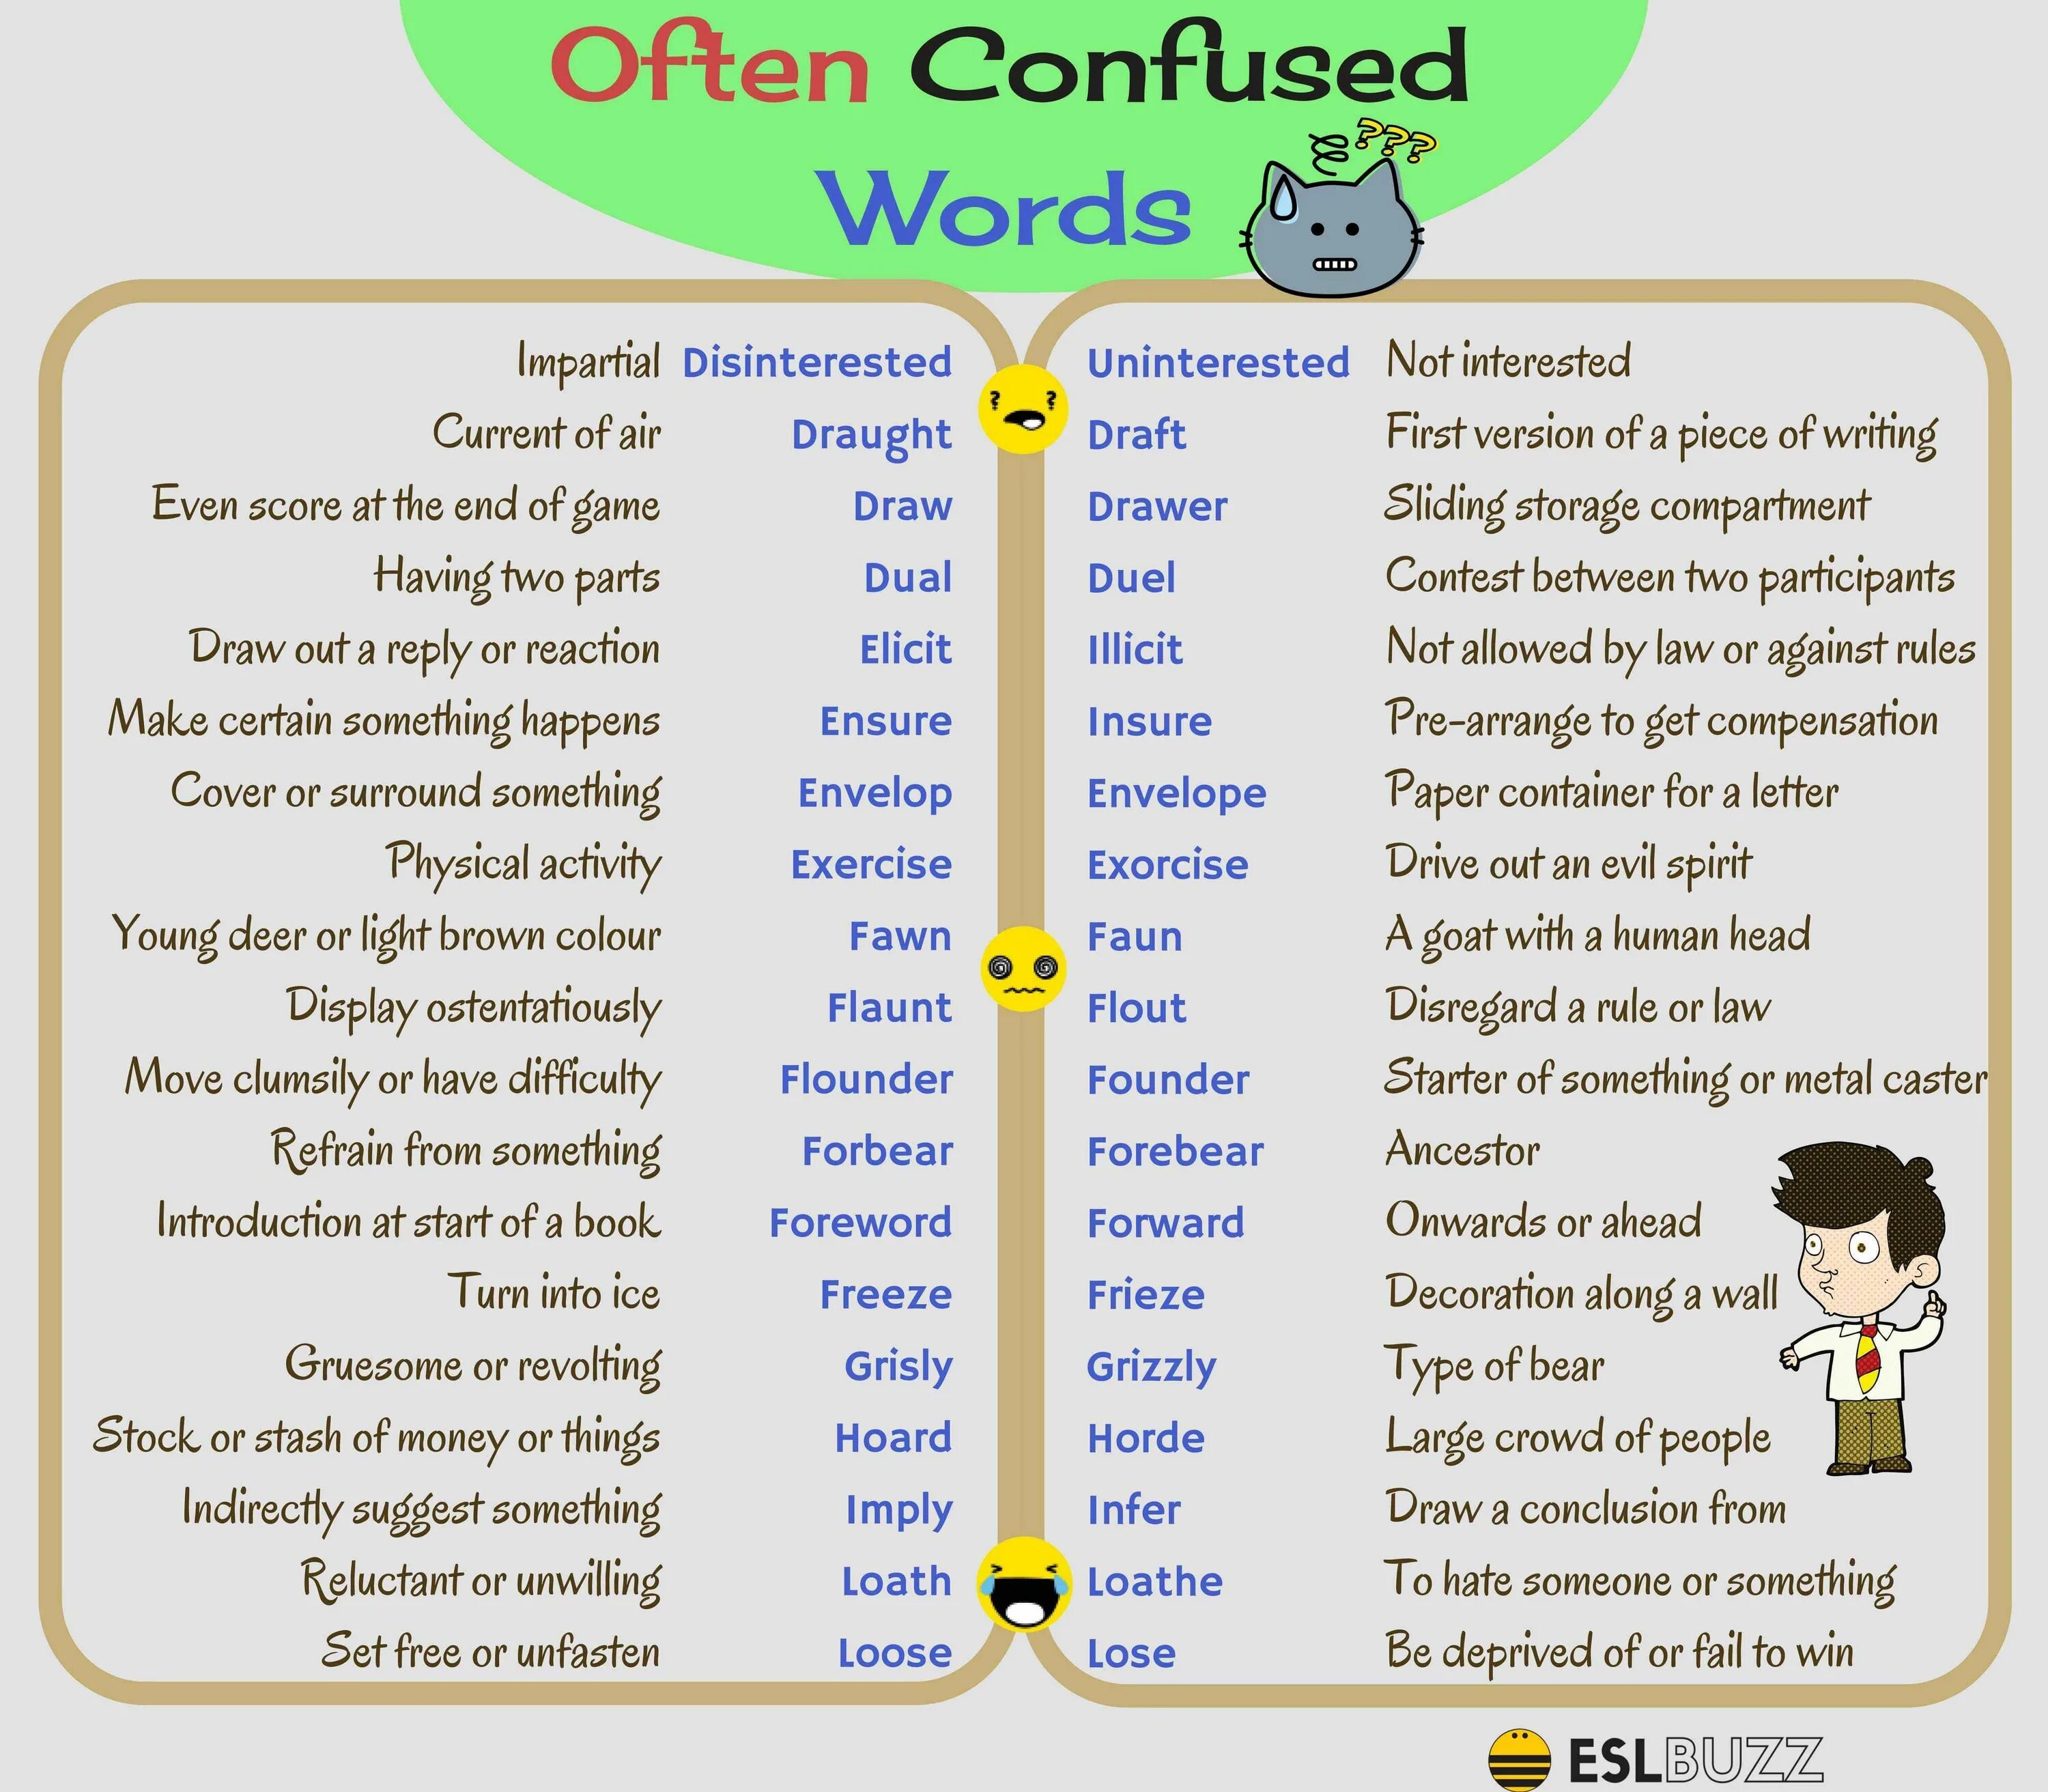 English phrases vocabulary. Words often confused в английском. Confusing Words in English список. Confusable Words в английском языке. Confusing Words ЕГЭ английский.